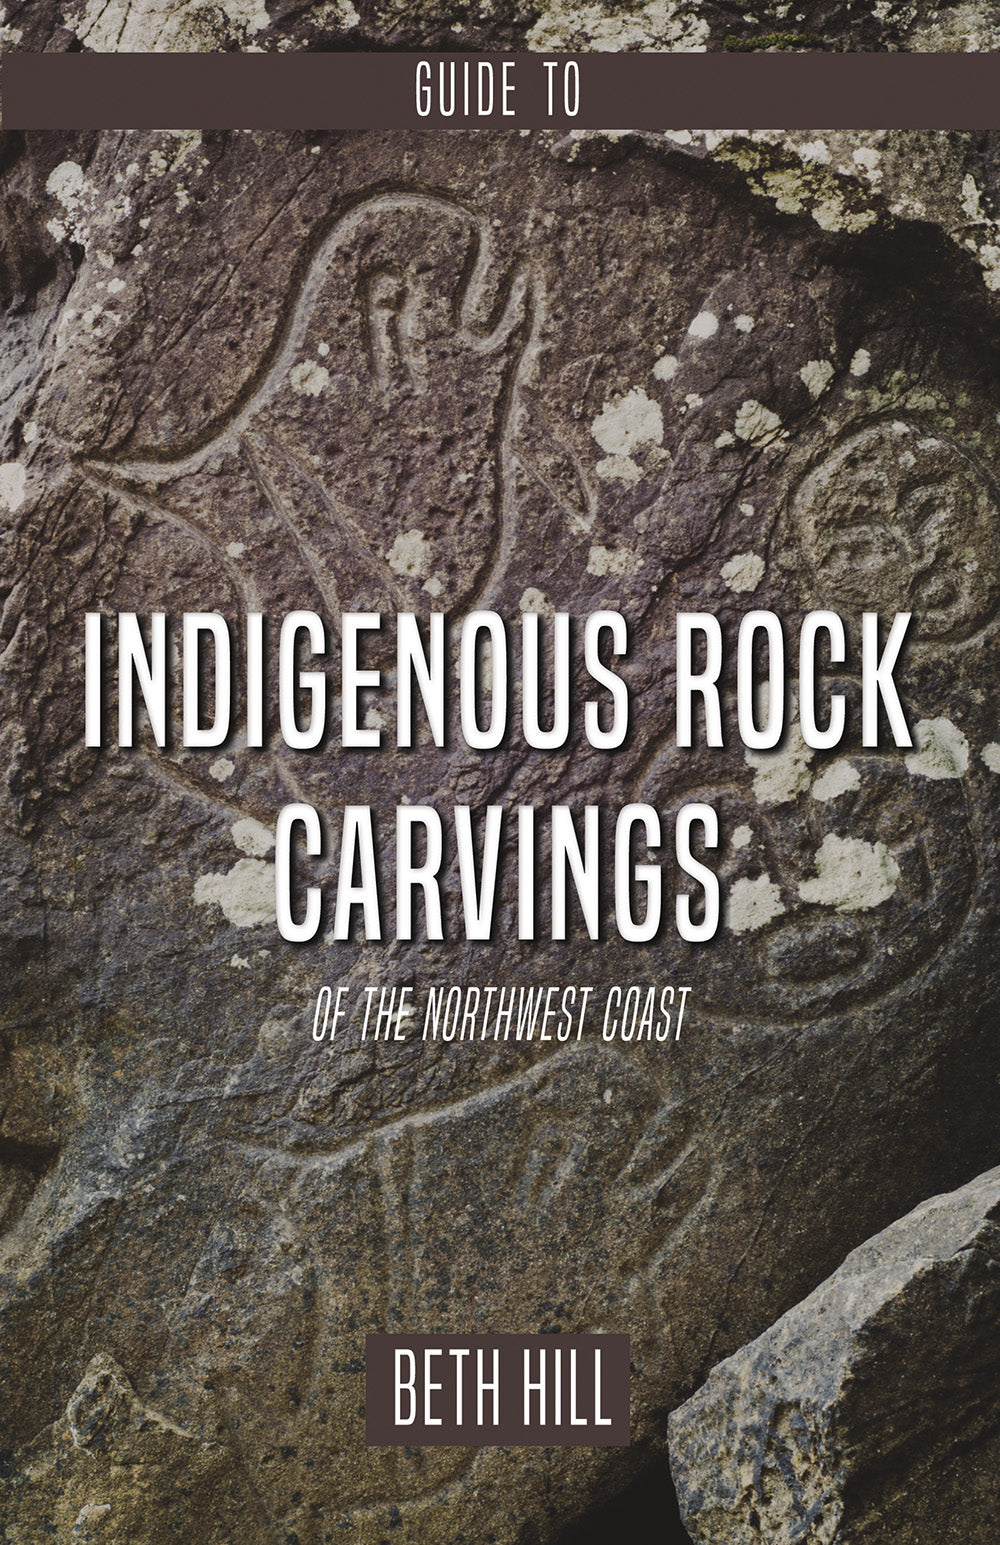 Guide to Indigenous Rock Carvings of the Northwest coast: Petroglyphs and Rubbings of the Pacific Northwest